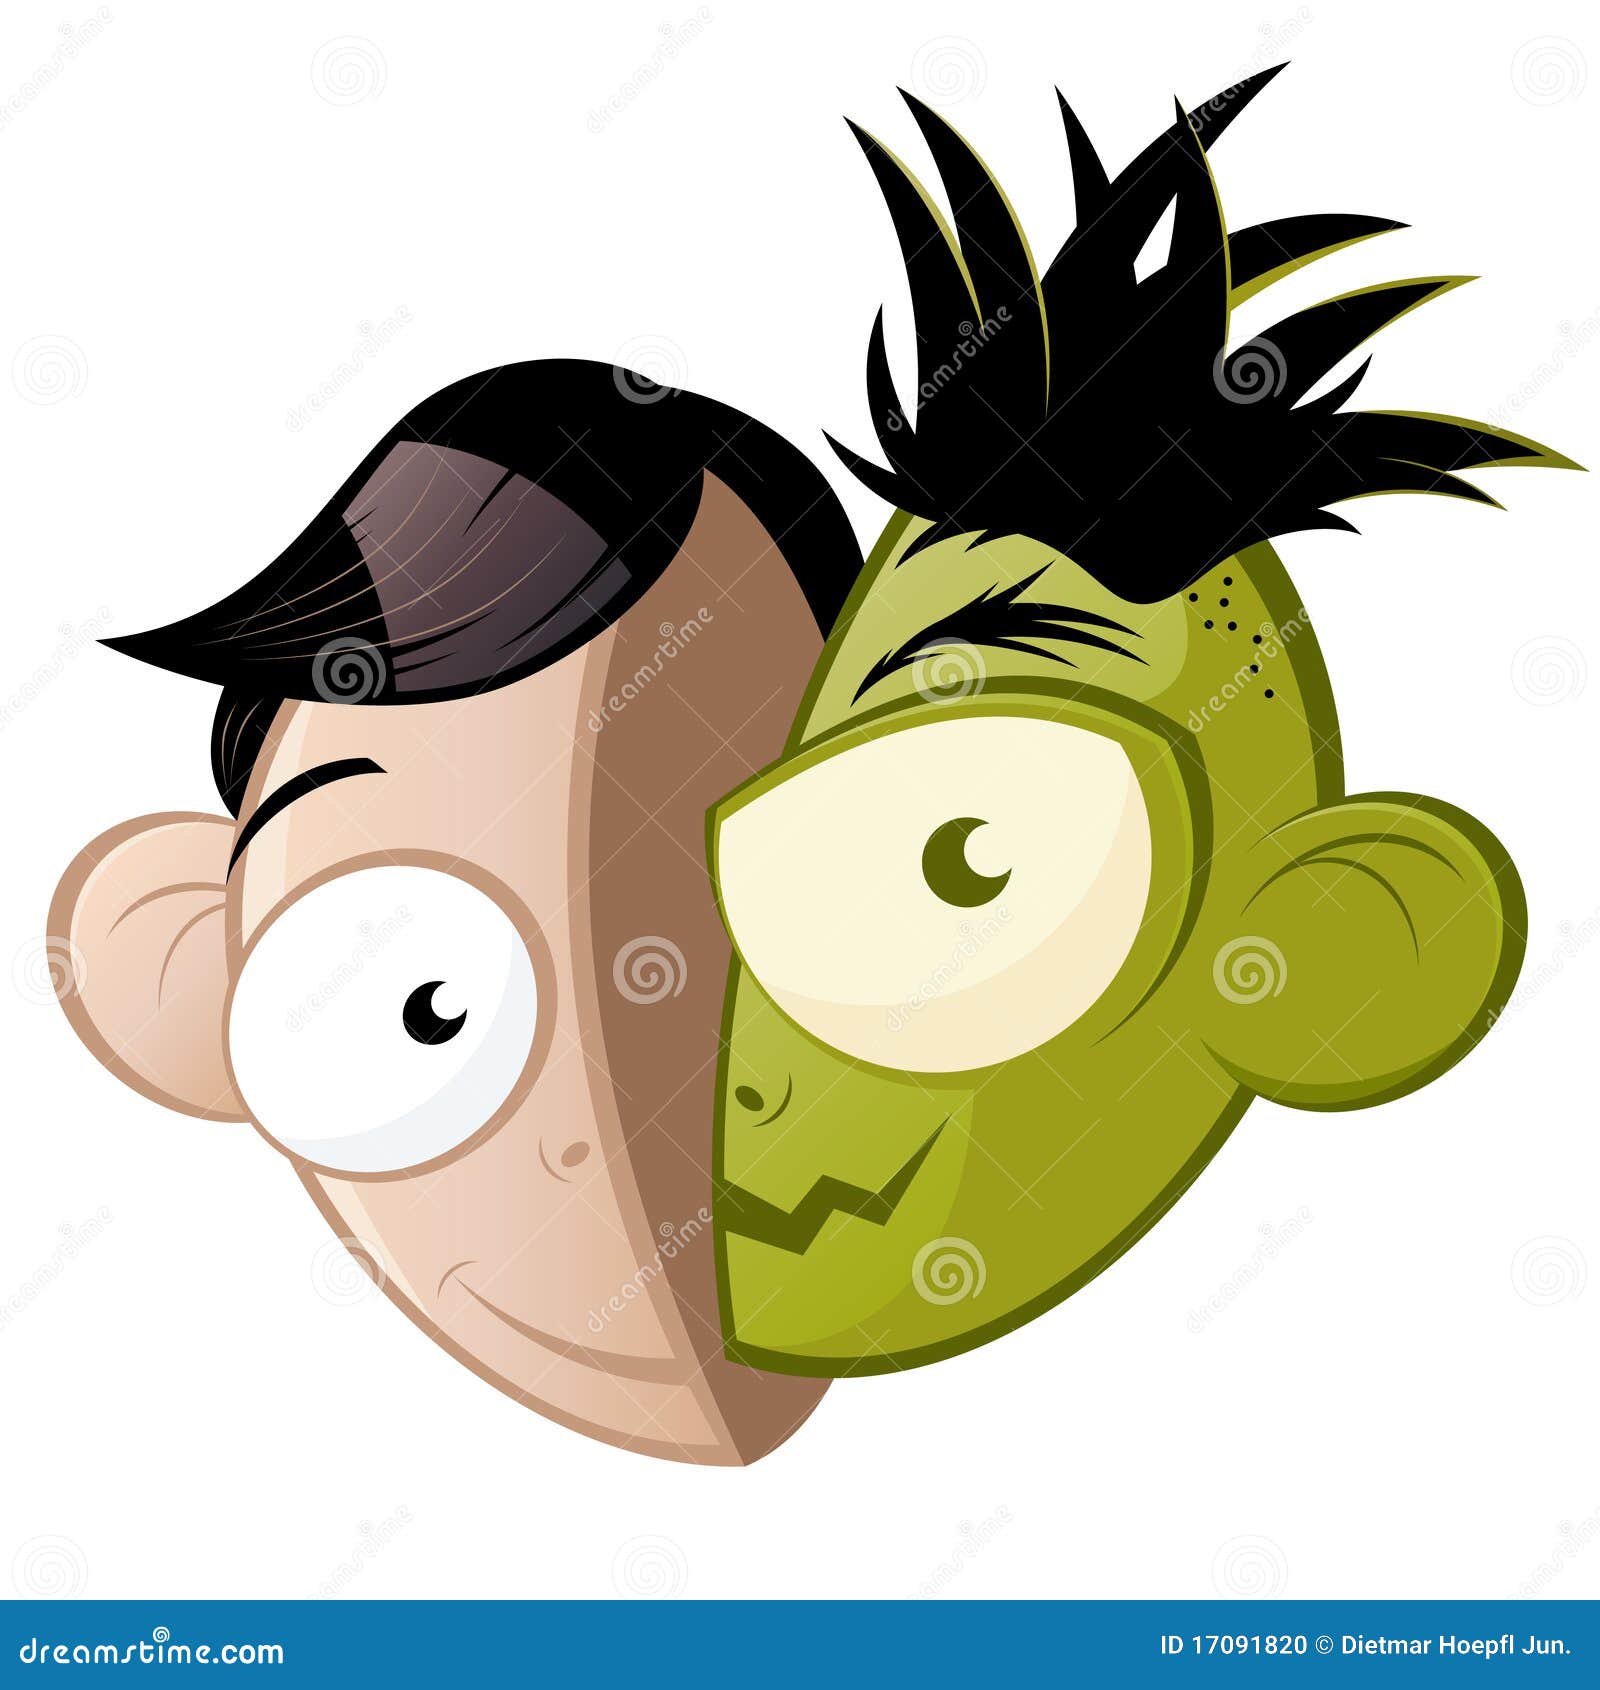 Good face bad face stock vector. Illustration of good - 17091820